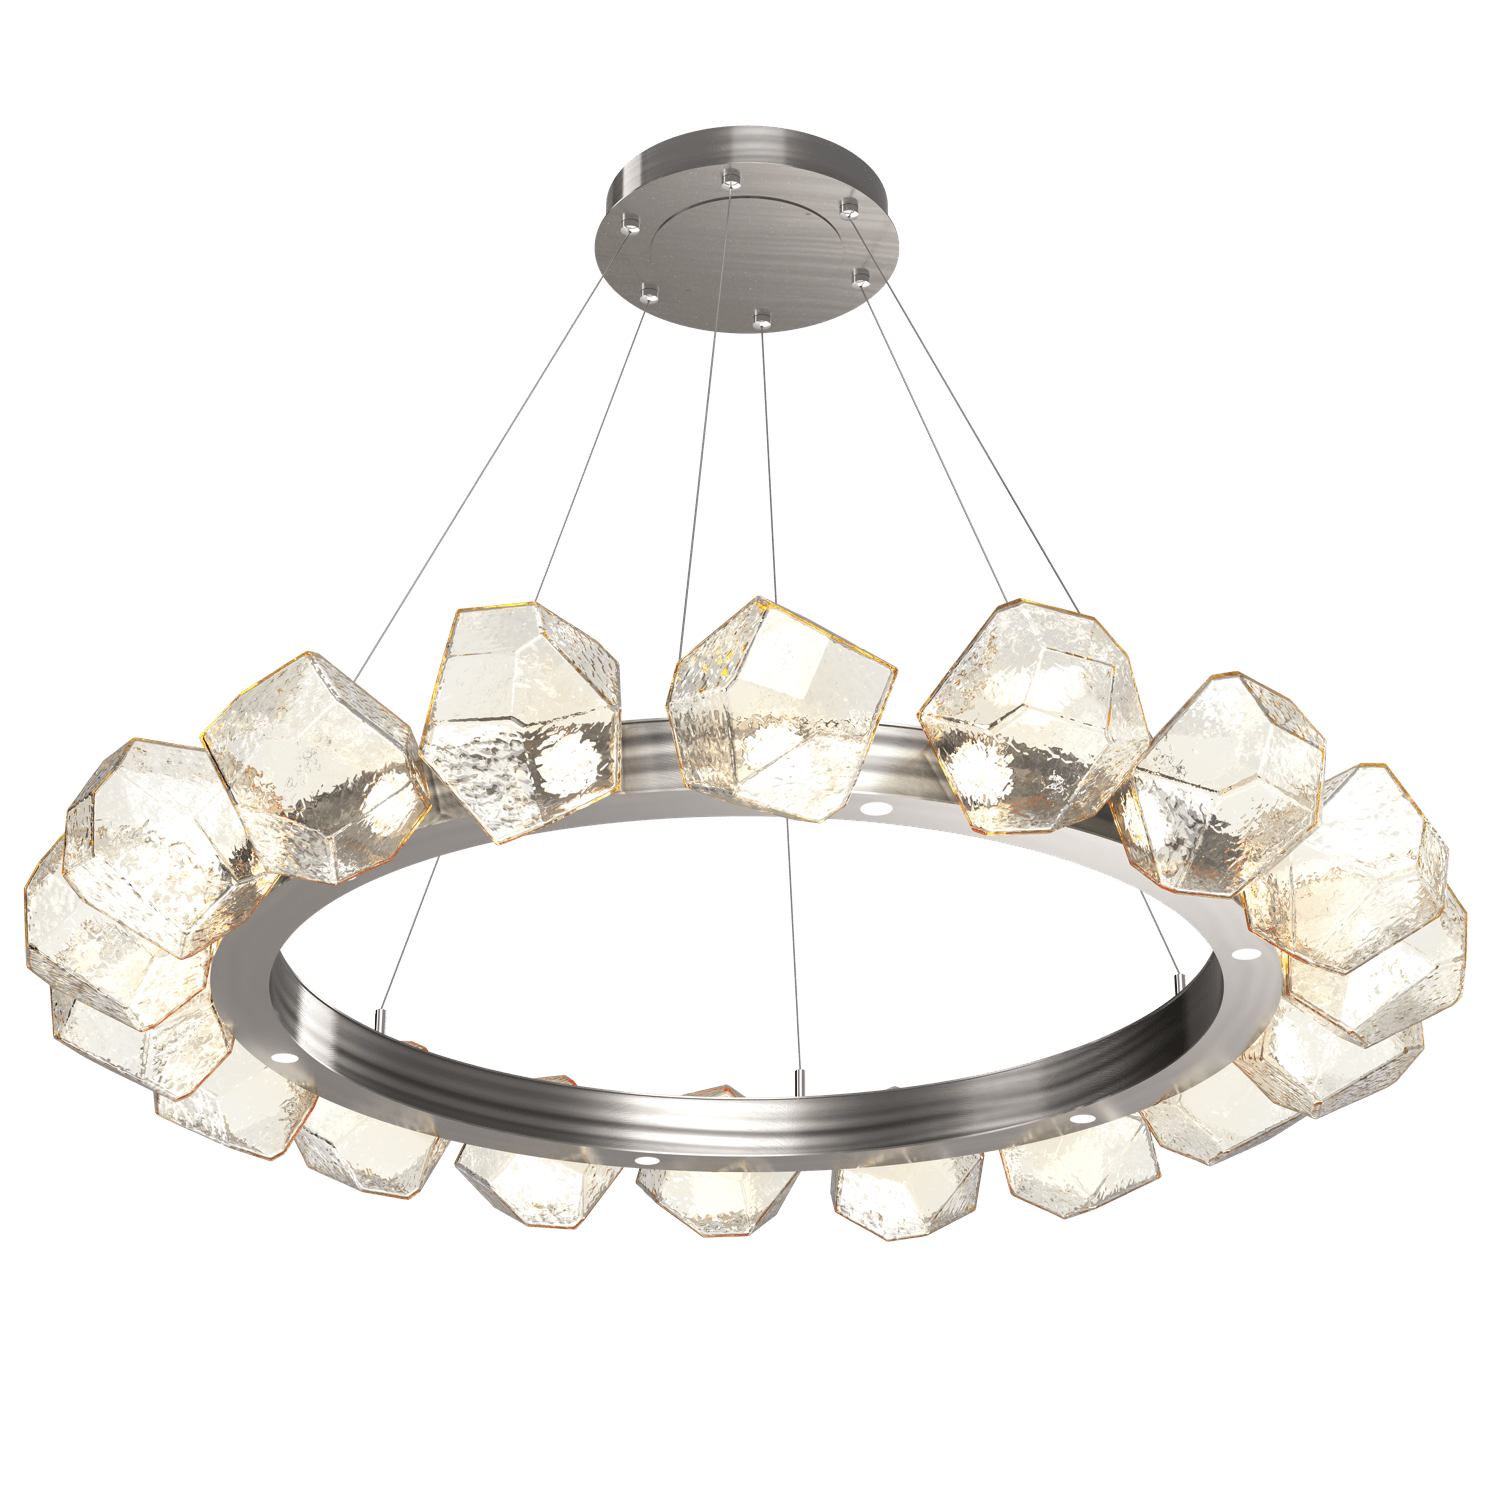 CHB0039-48-GM-A-Hammerton-Studio-Gem-48-inch-radial-ring-chandelier-with-gunmetal-finish-and-amber-blown-glass-shades-and-LED-lamping